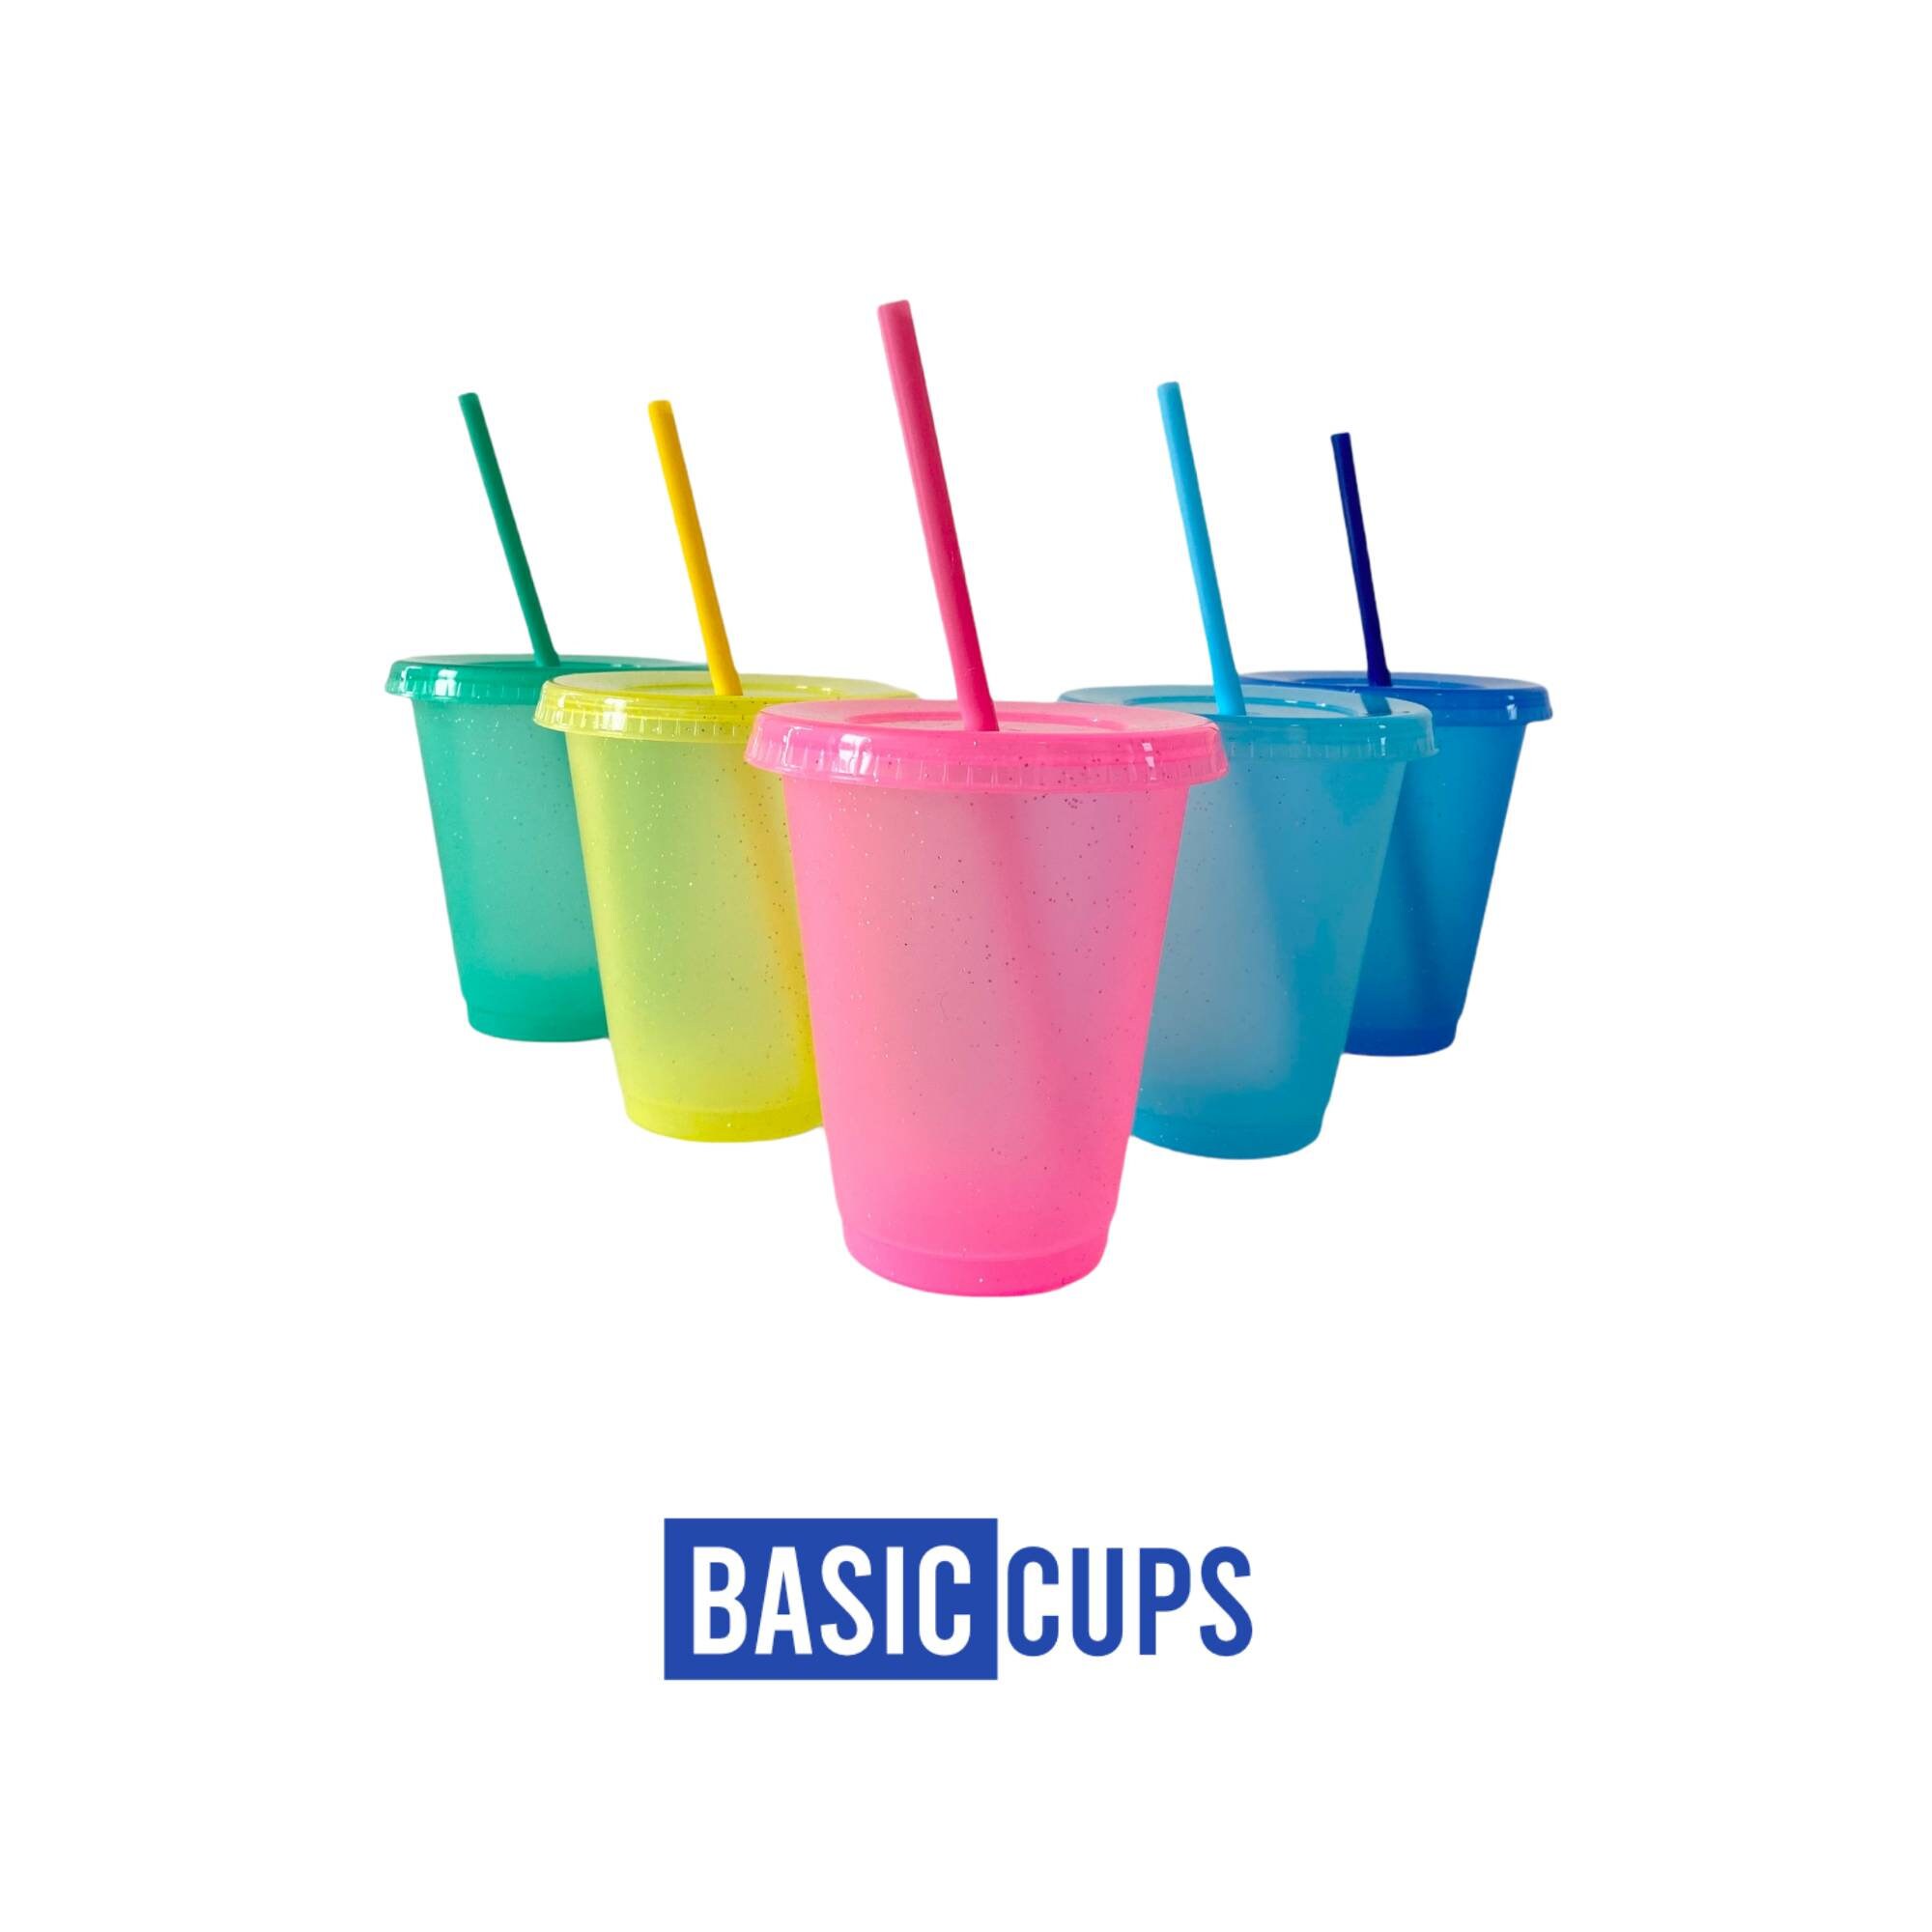 4 Blank Tumblers Venti 22oz Colored Pastel Acrylic Matte Plastic Cups in  Bulk With Lids and Straws for DIY, Wholesale sky Blue 